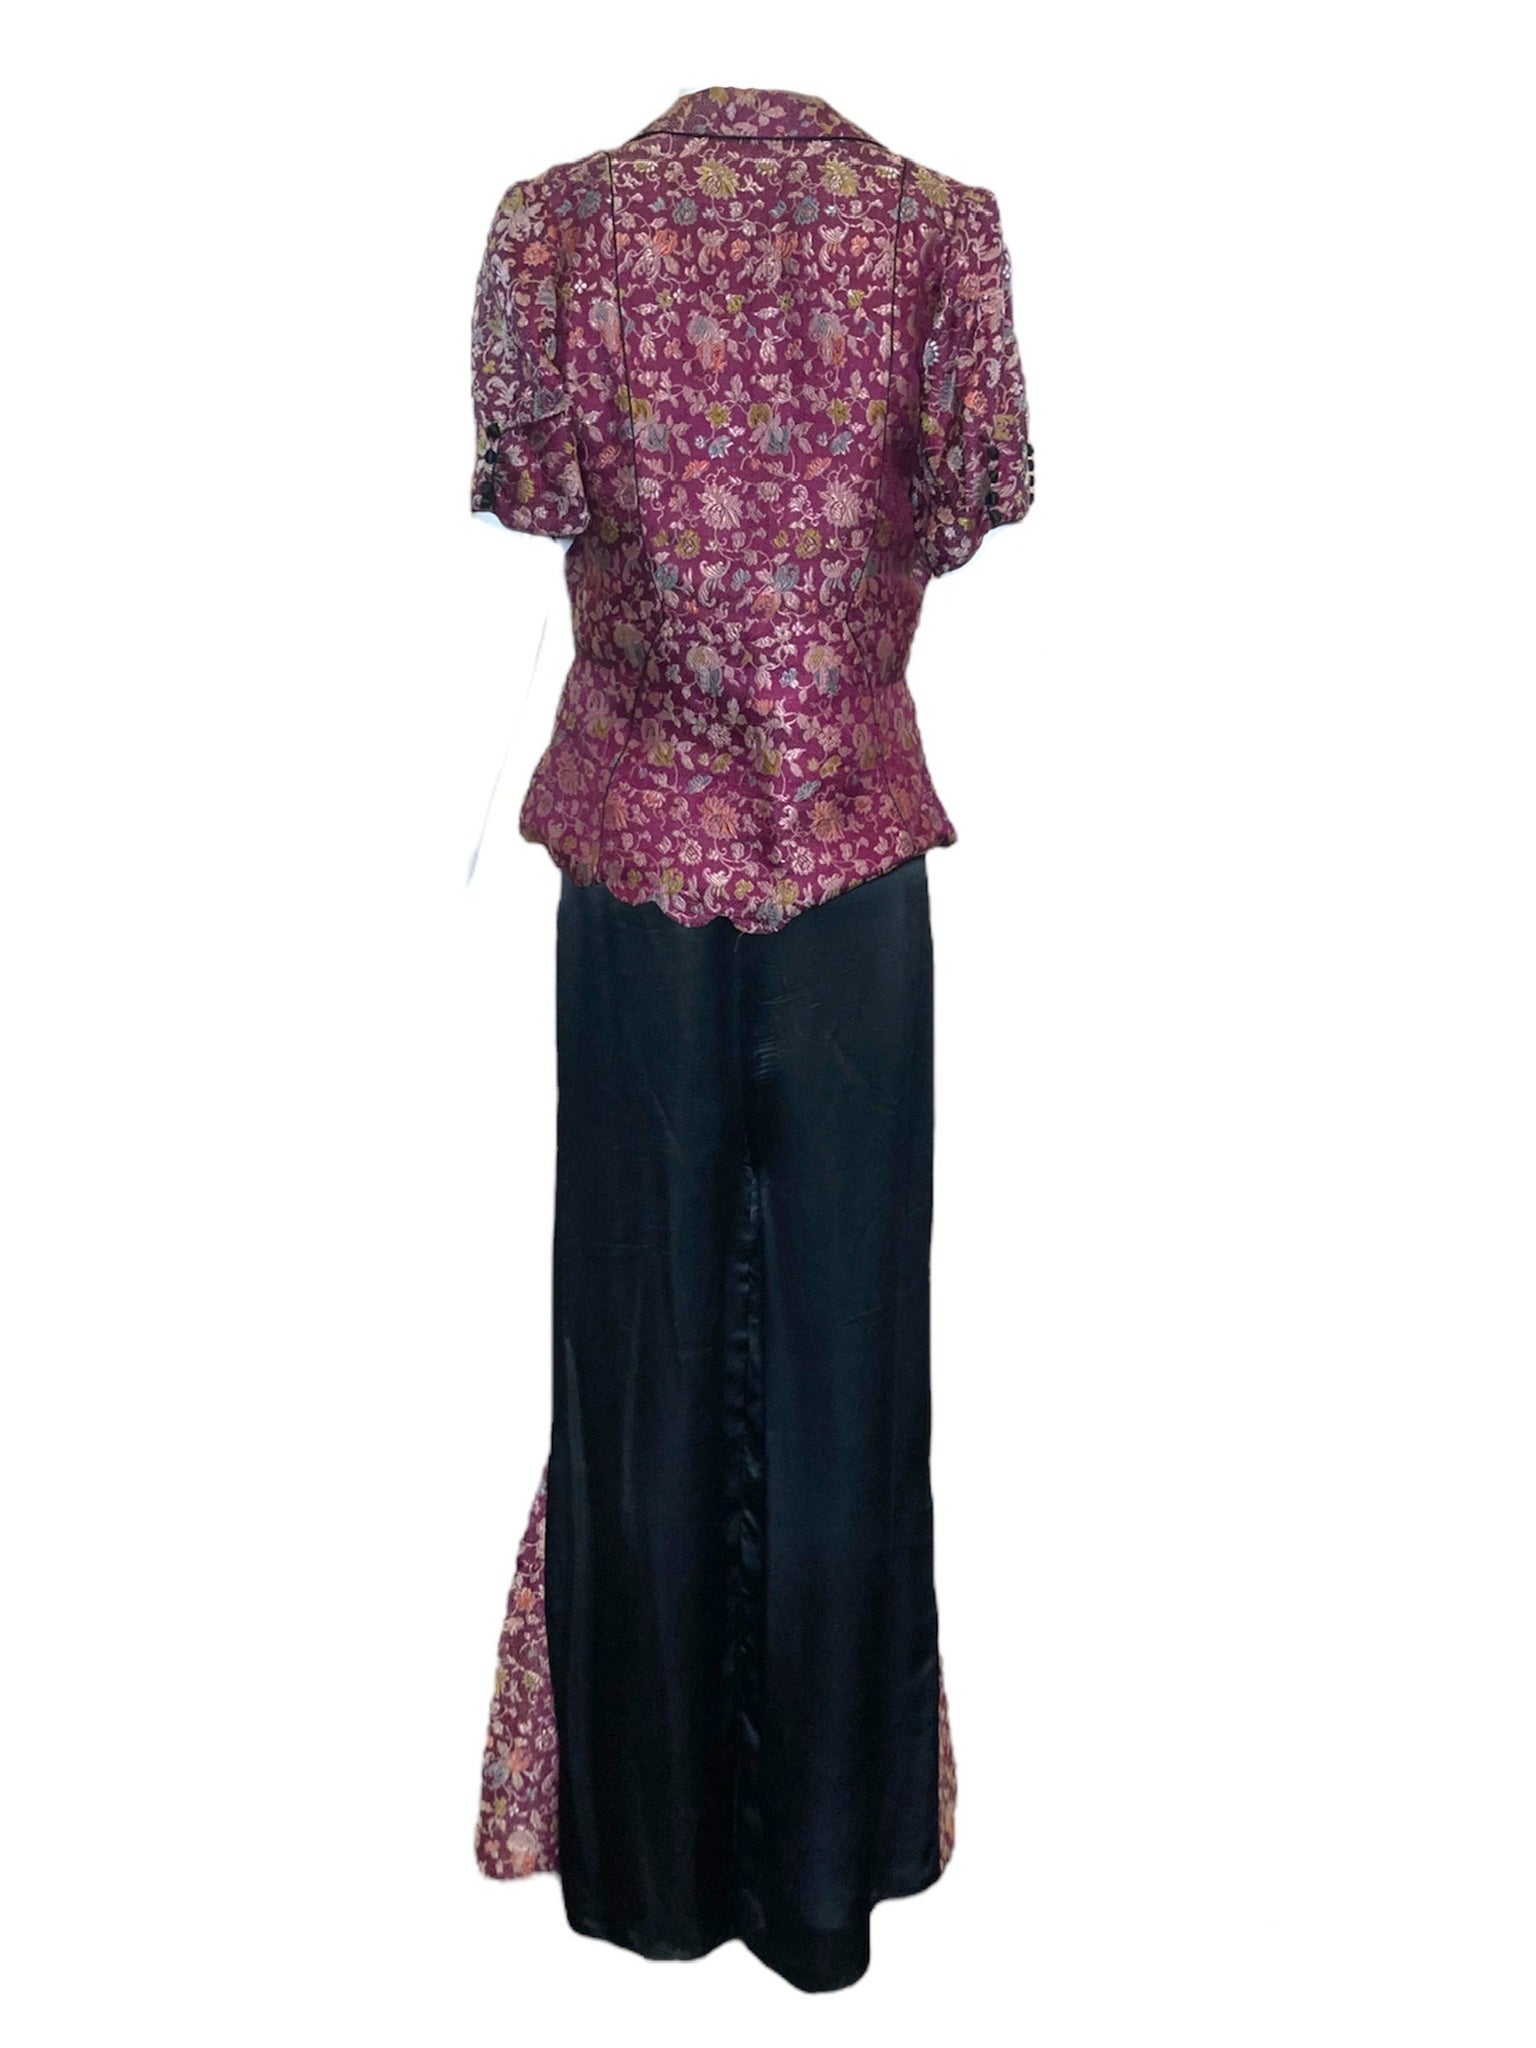 30s Chinese Inspired Purple and Black Lounging Pajamas BACK 3 of 7